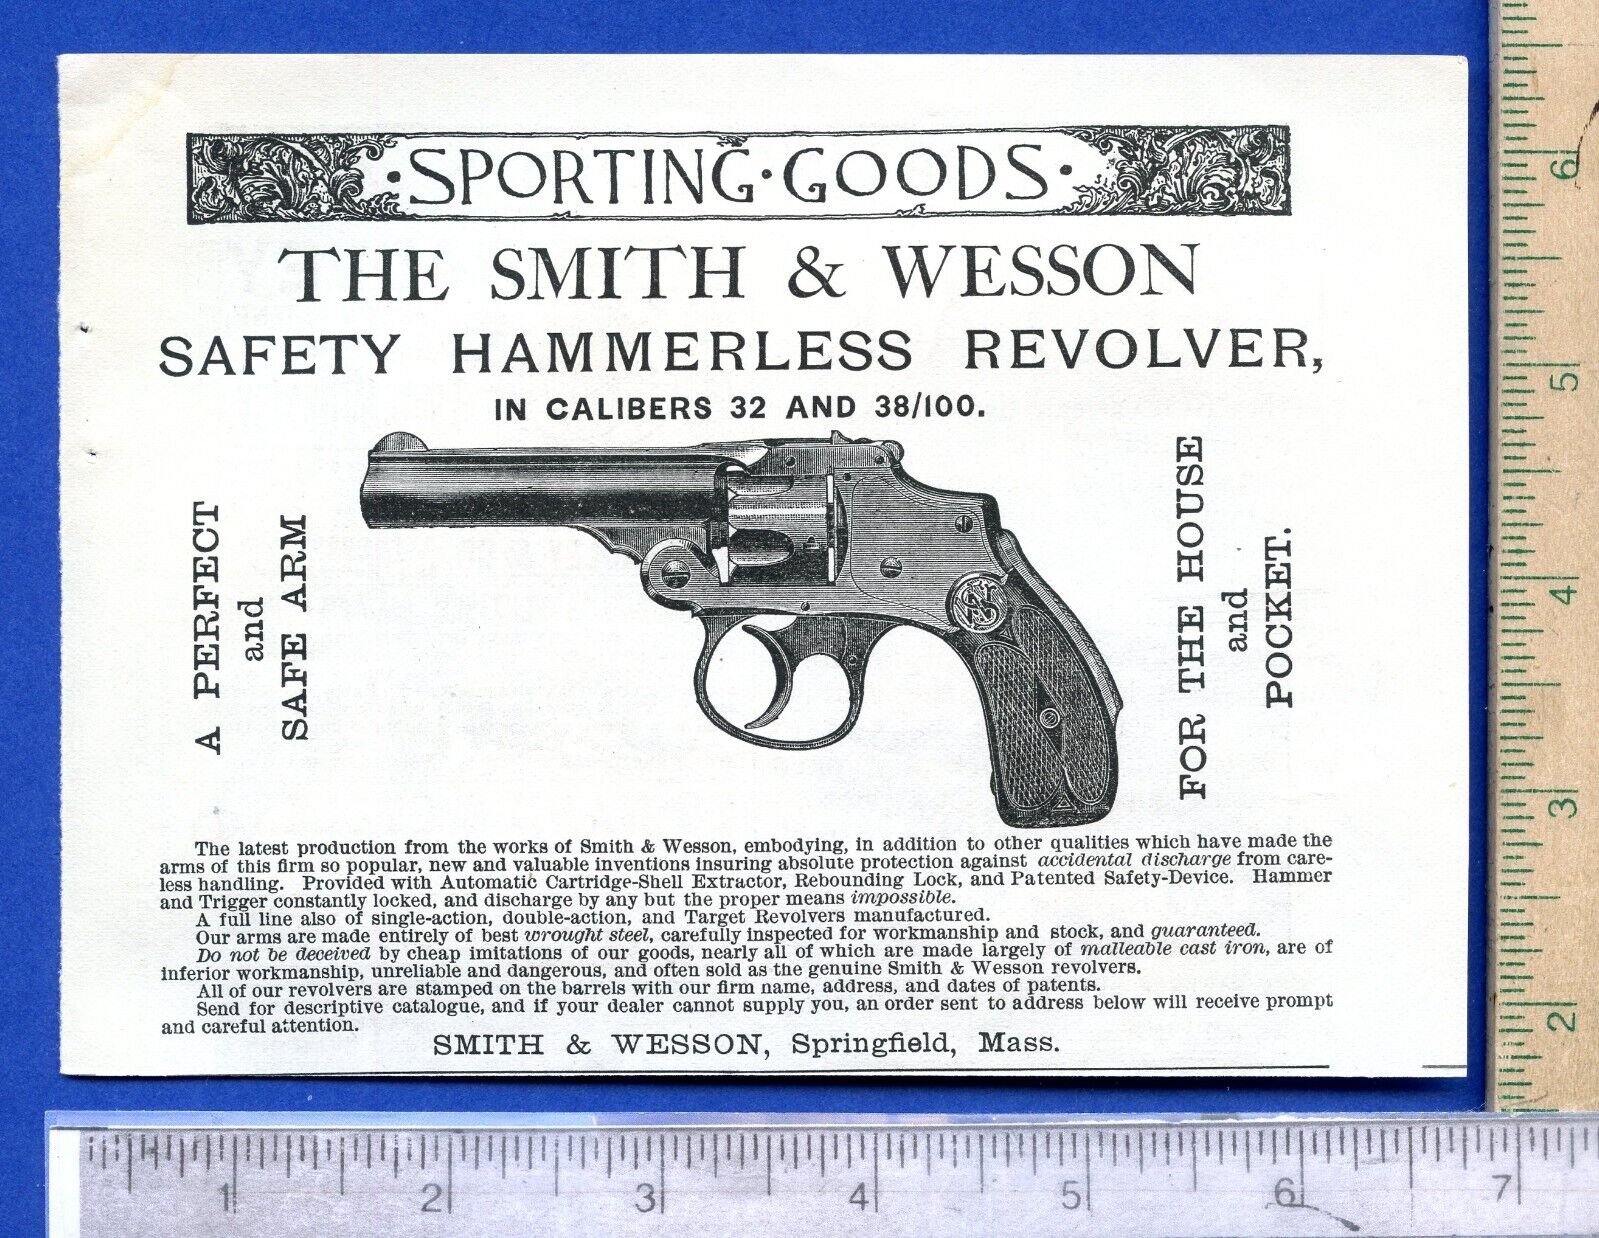 Original 1889 Smith & Wesson Safety Hammerless Revolver partial page print ad